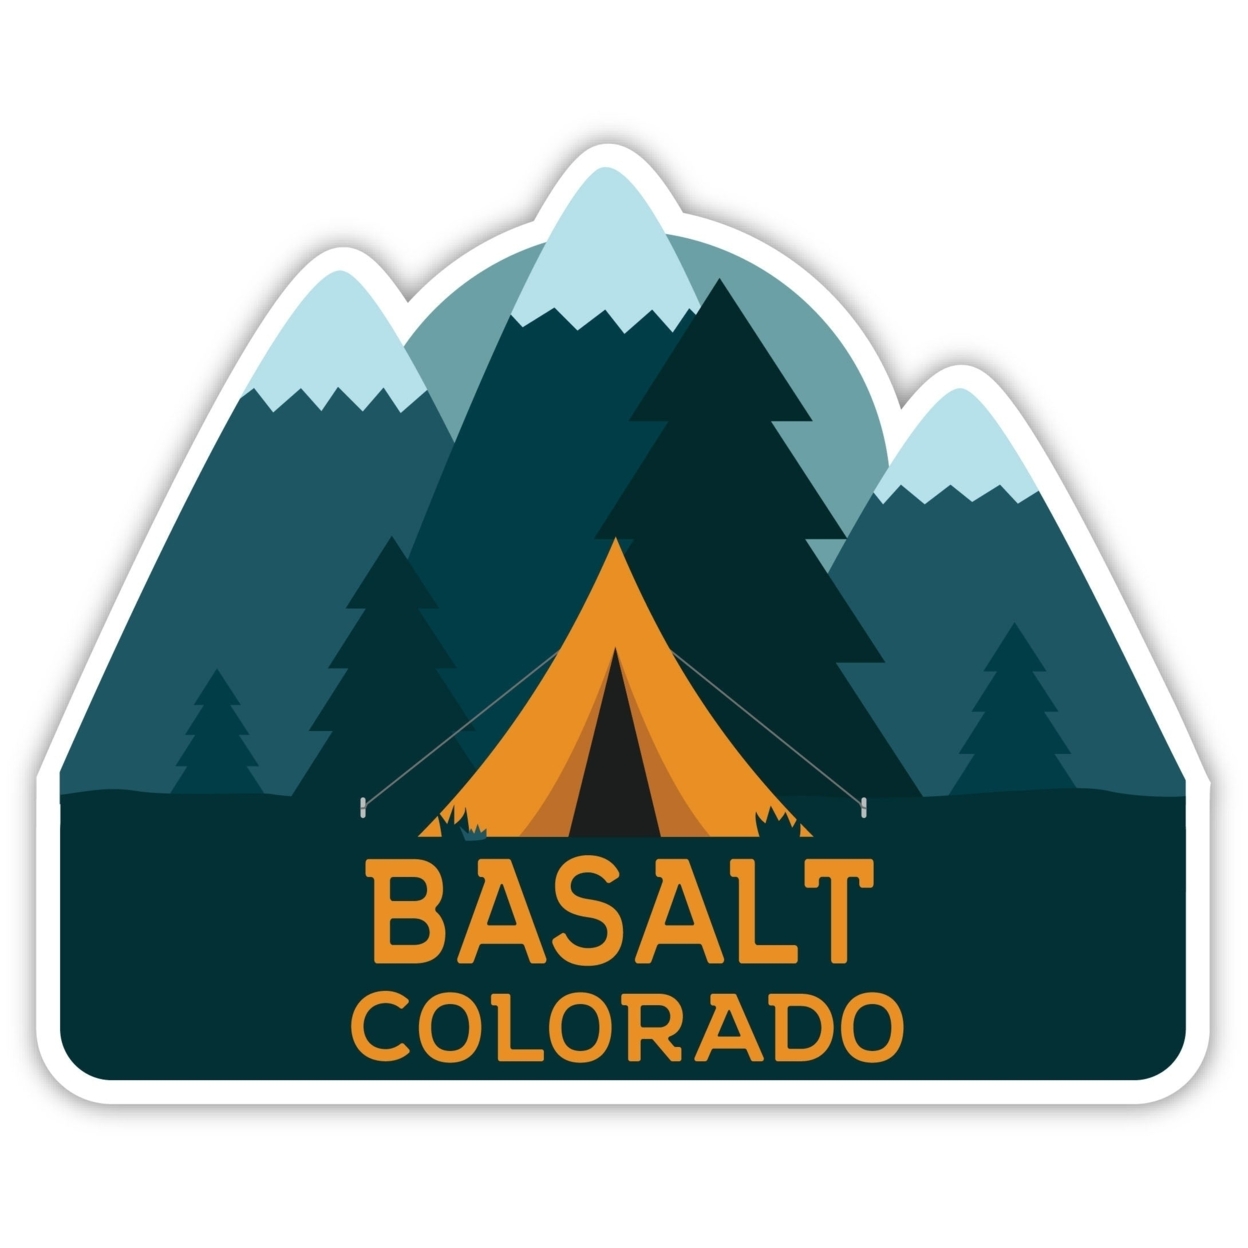 Basalt Colorado Souvenir Decorative Stickers (Choose Theme And Size) - 4-Pack, 4-Inch, Great Outdoors